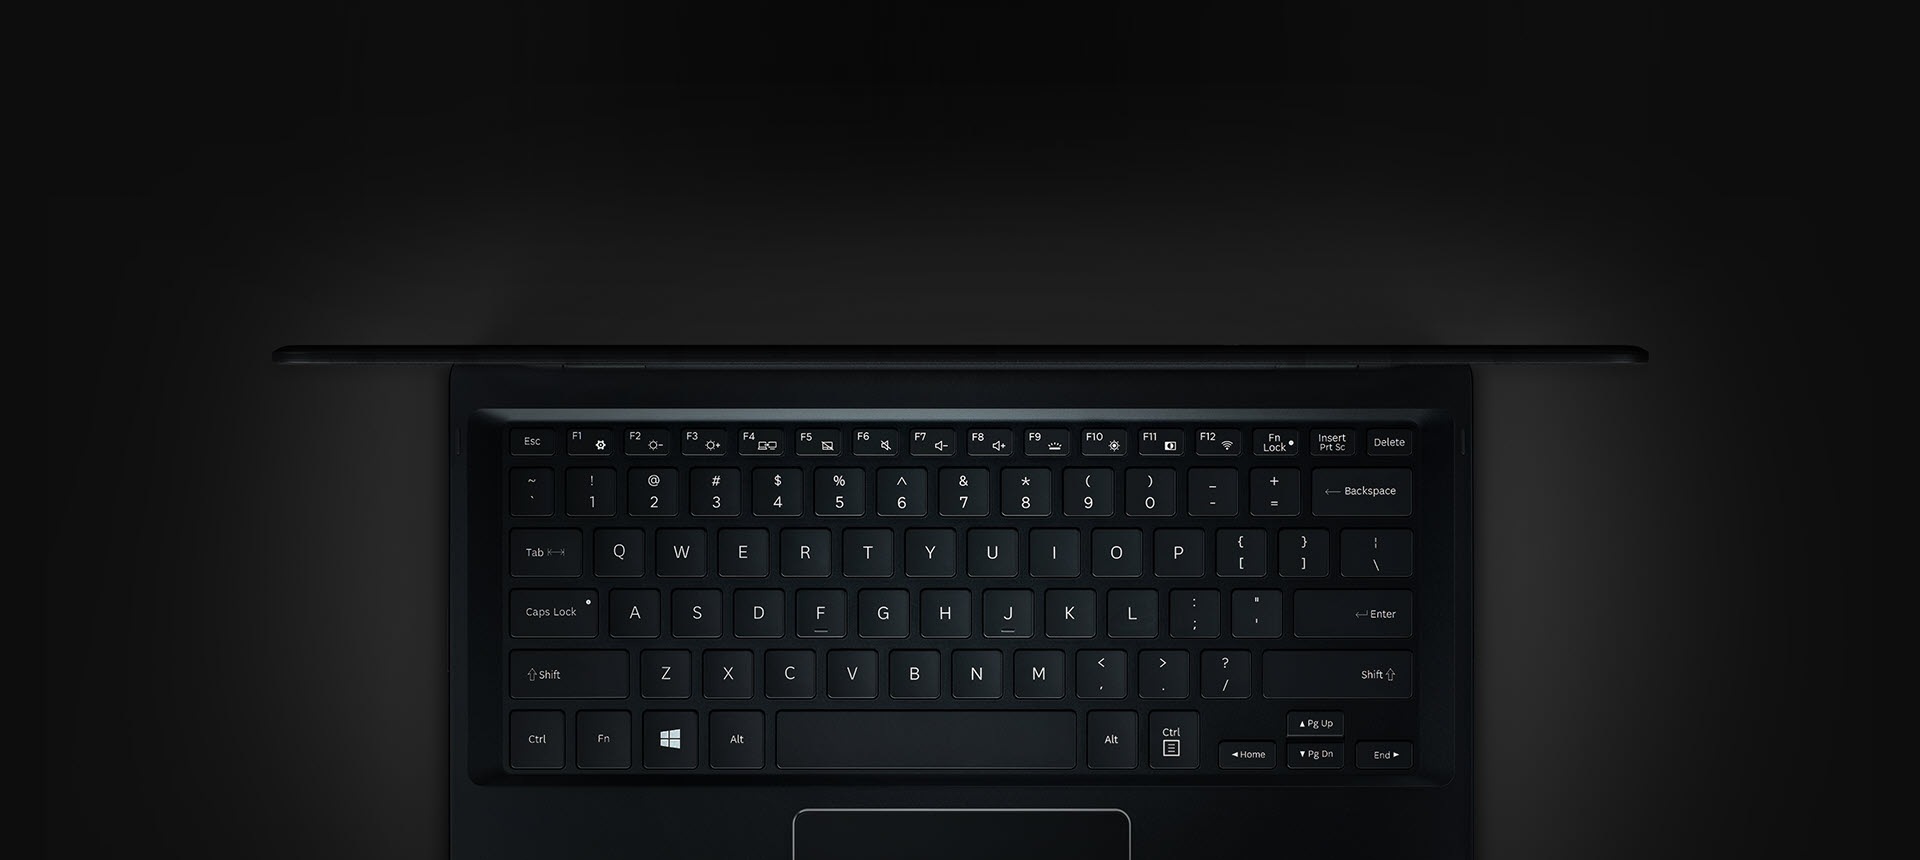 An image showing the Notebook 9  spin's keyboard with its backlighting off.